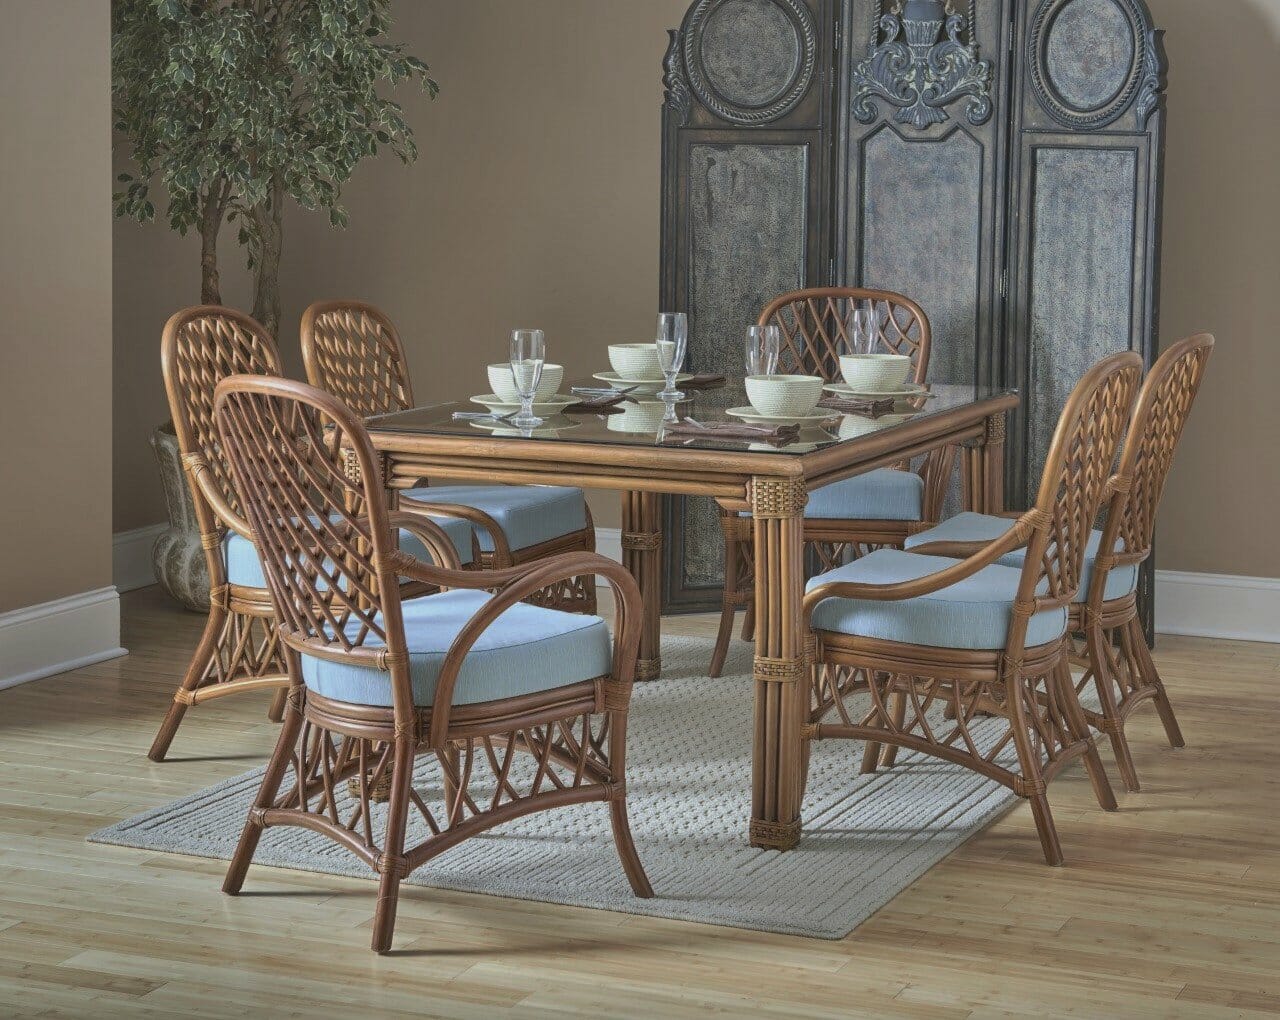 Dining Room Set With Rattan Chairs